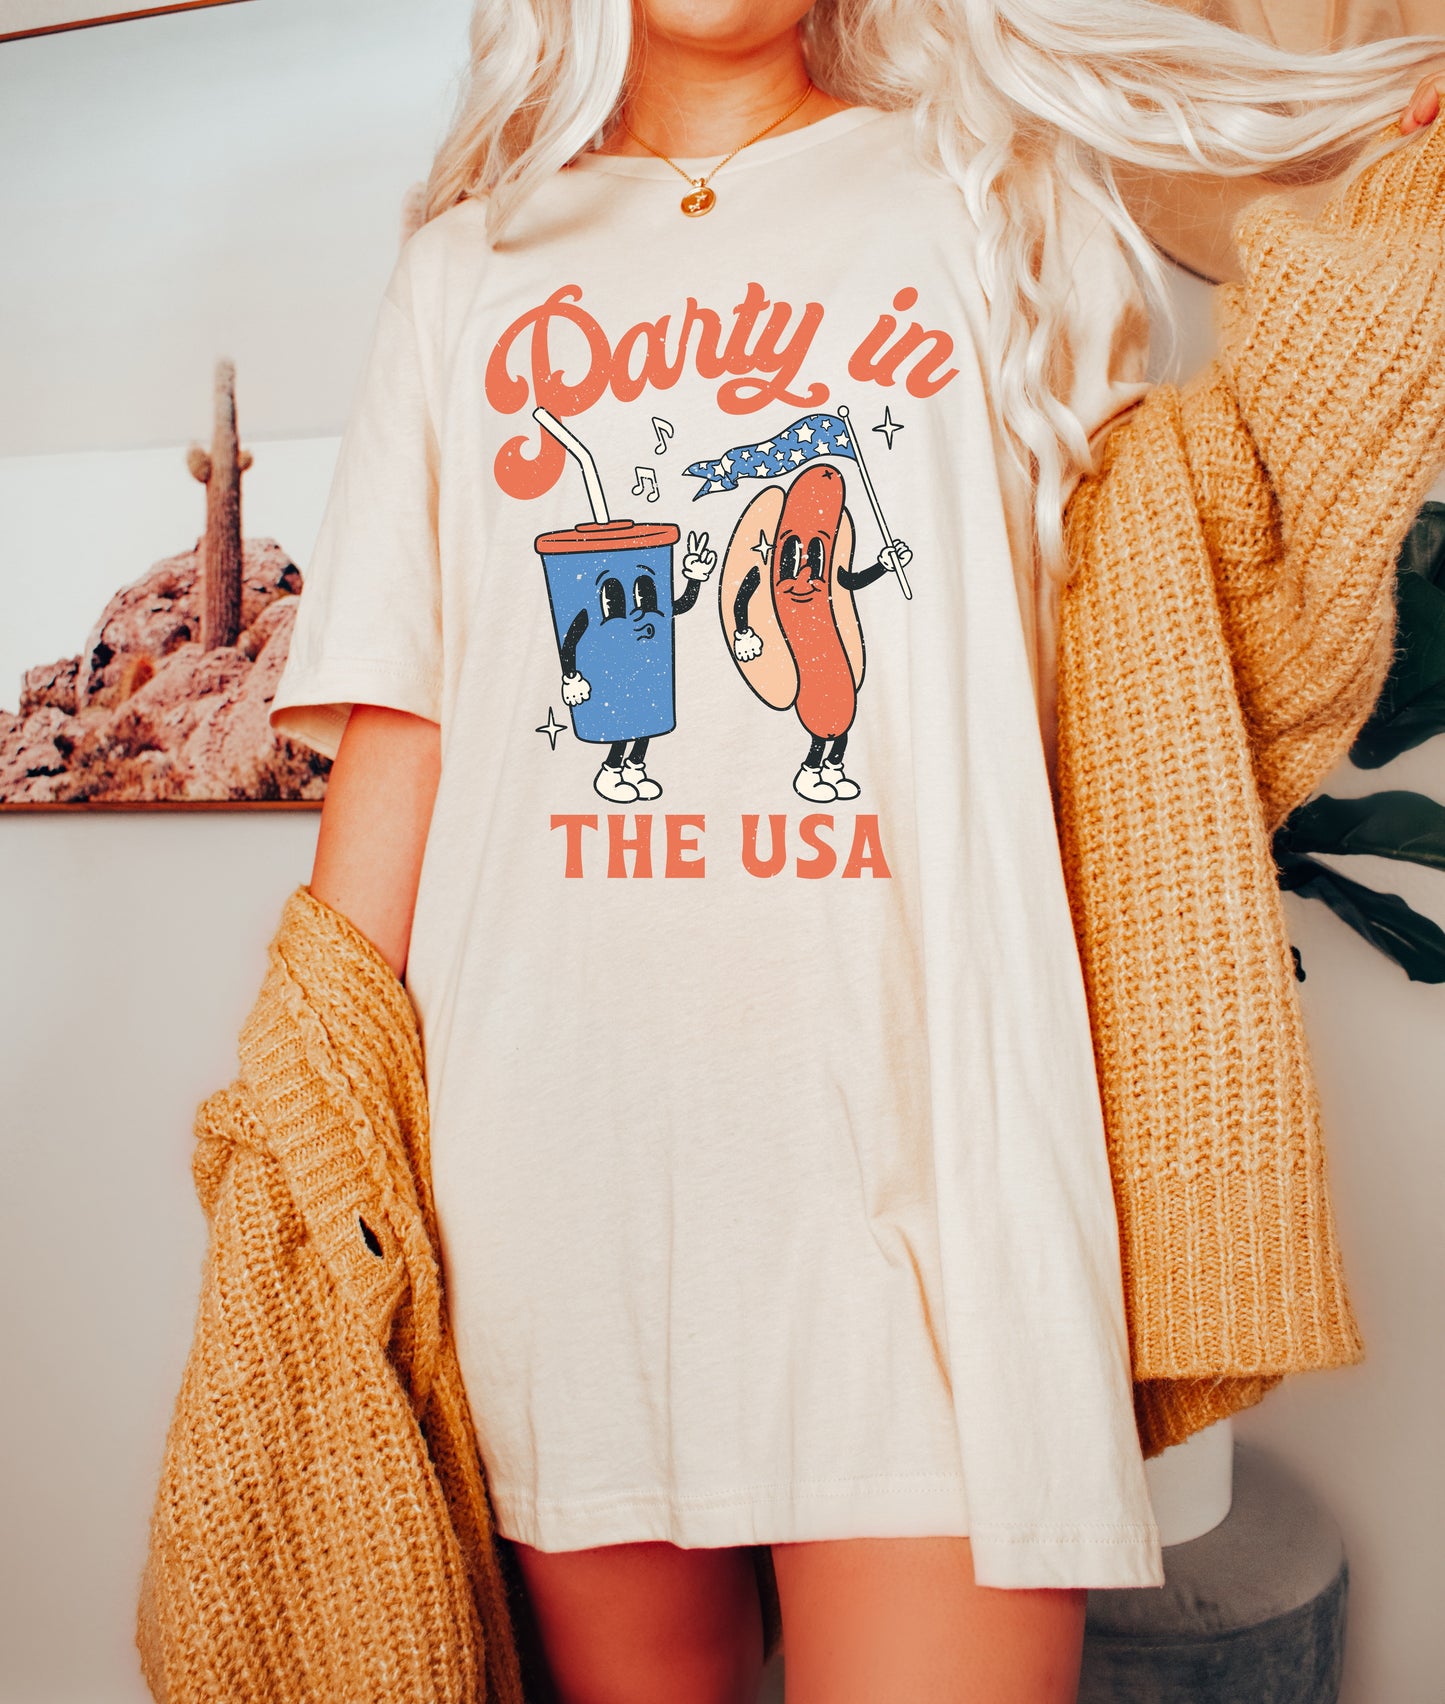 *Party in the USA T-Shirt or Crew Sweatshirt